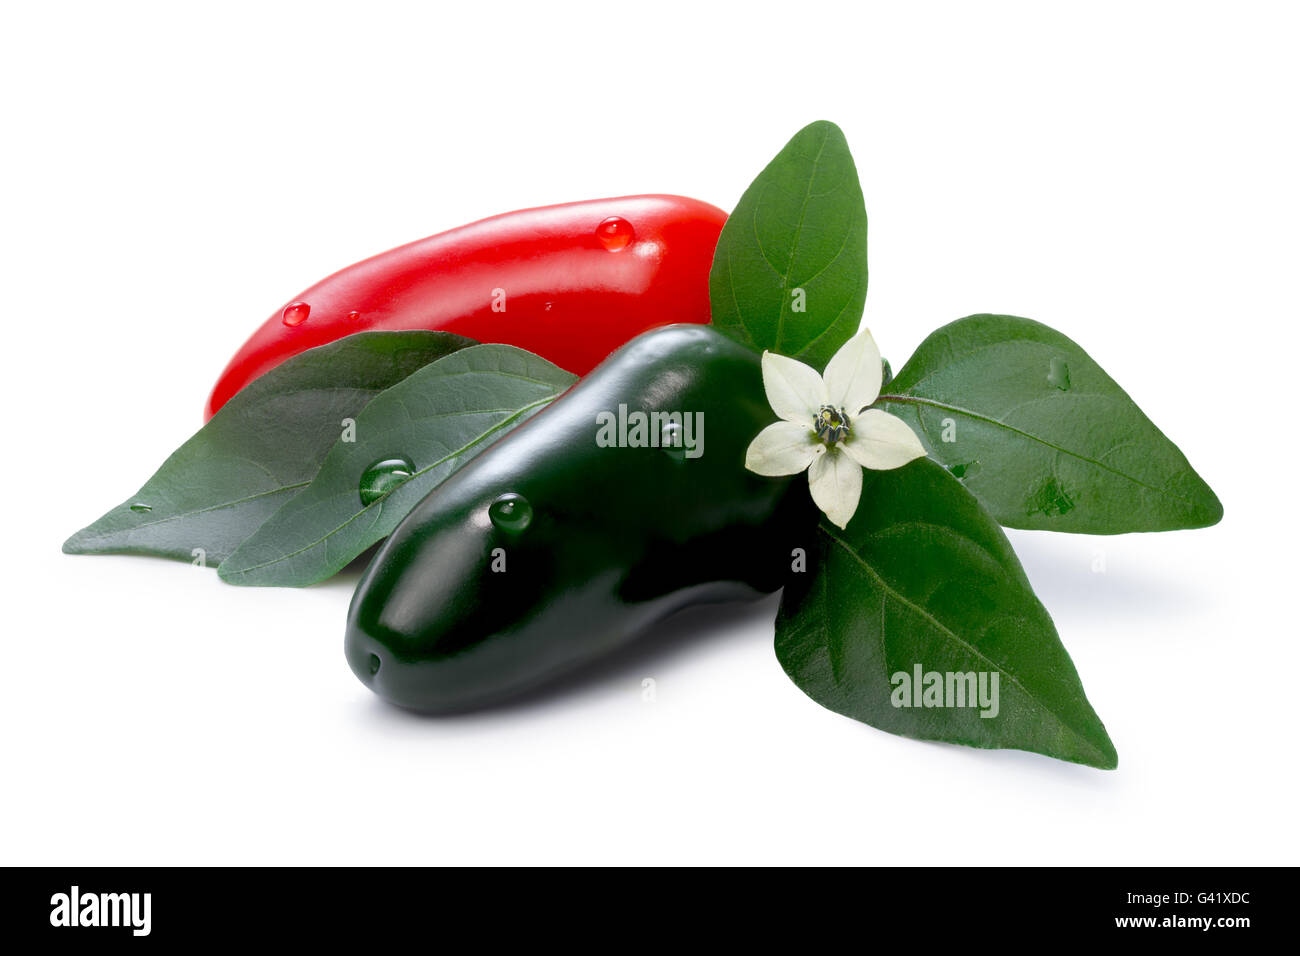 Hot Laminada Peppers (Capsicum Annuum), red and green, with leaves and flower. Clipping paths for both peppers and shadow, infin Stock Photo